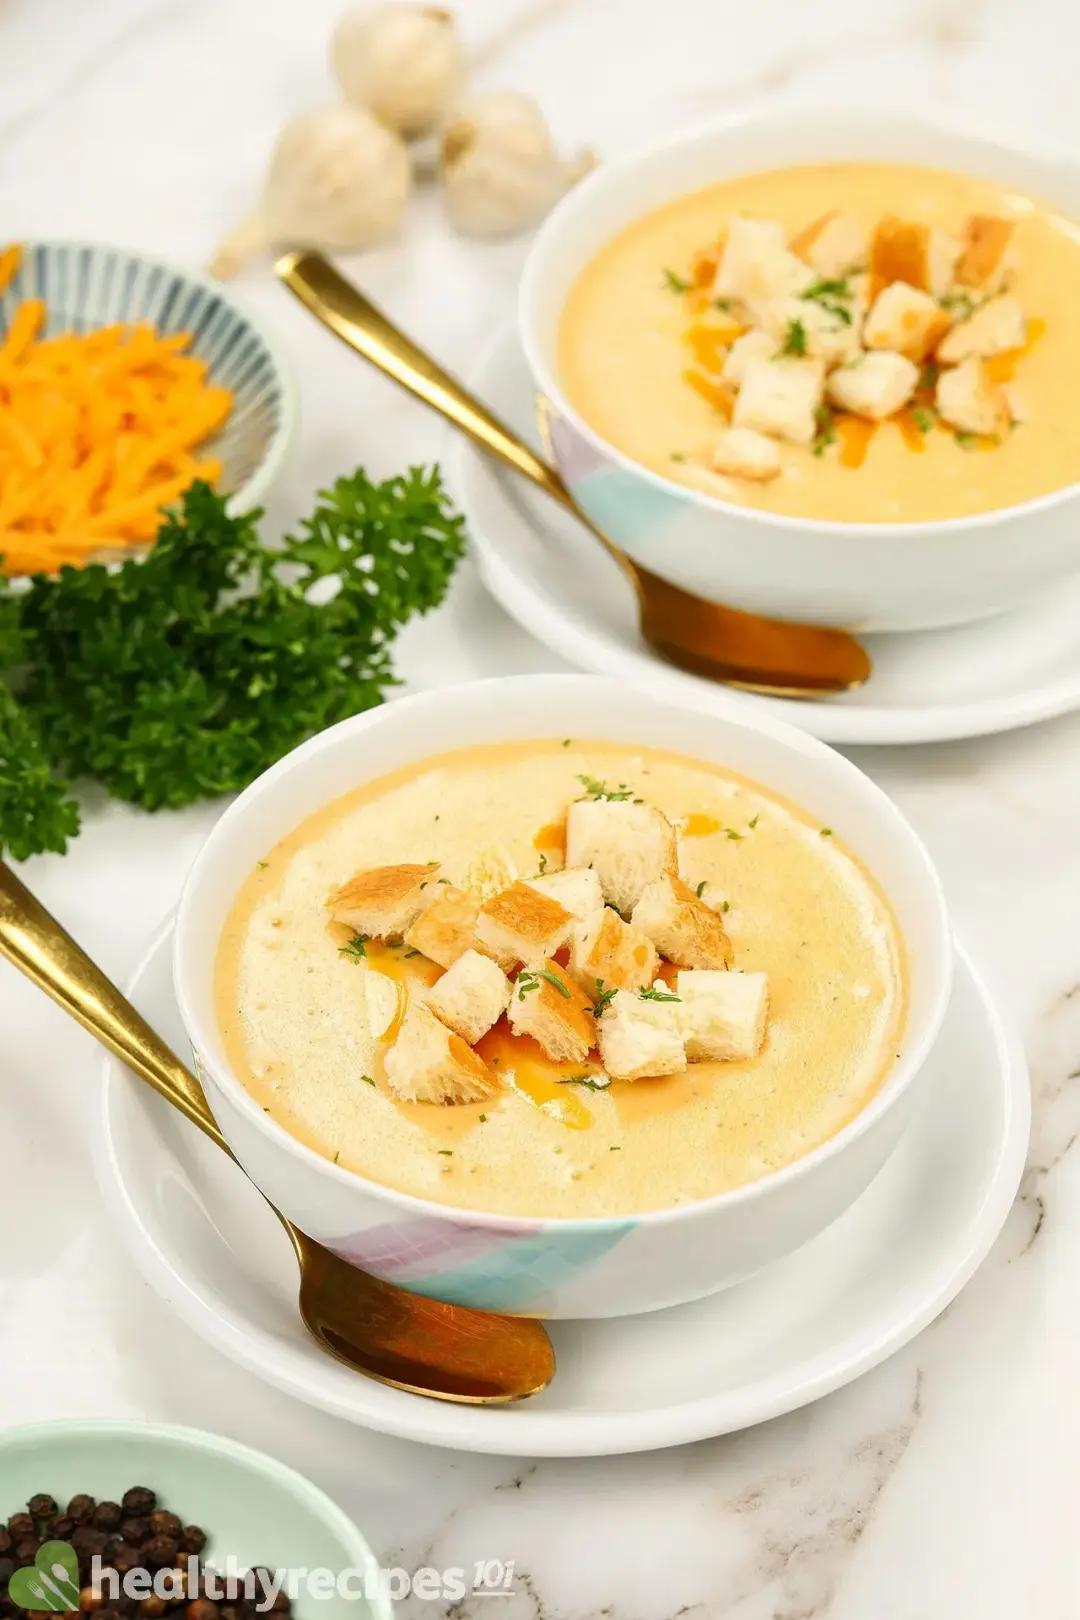 Tips for Making the Best Cheesy Potato Soup